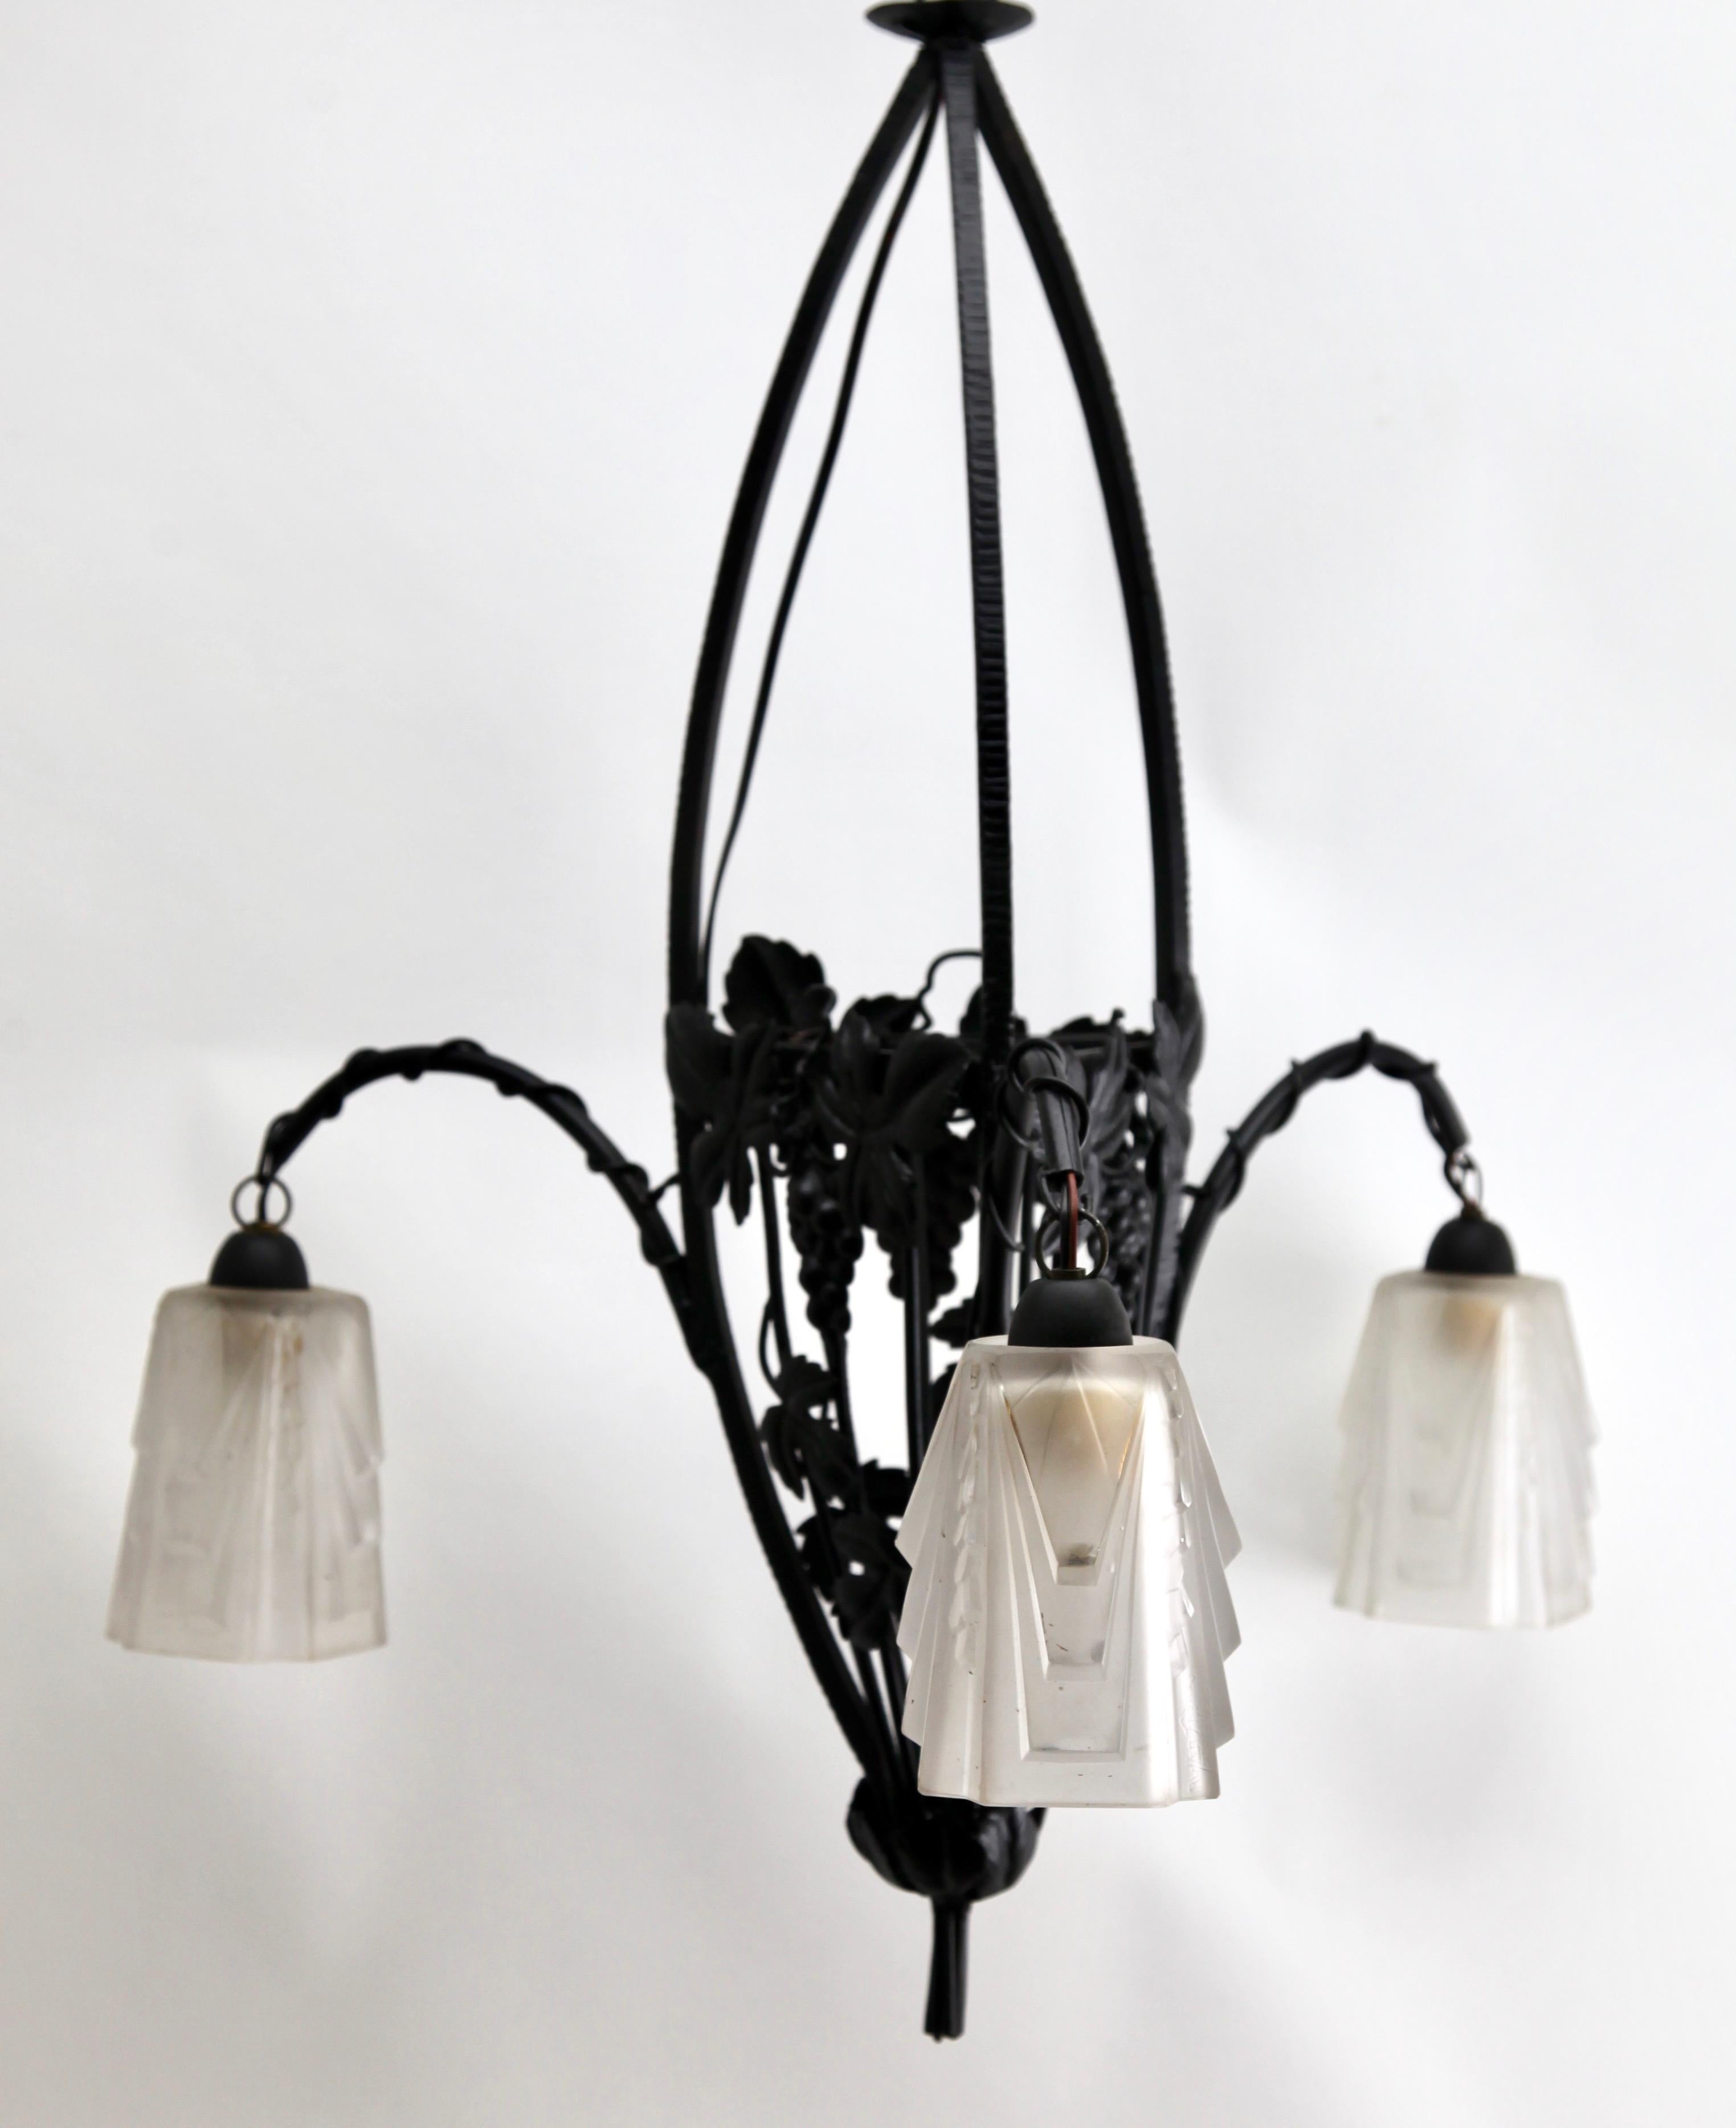 Art Nouveau Chandelier by Muller Freres Luneville, Schades Are Signed, 1900s For Sale 1